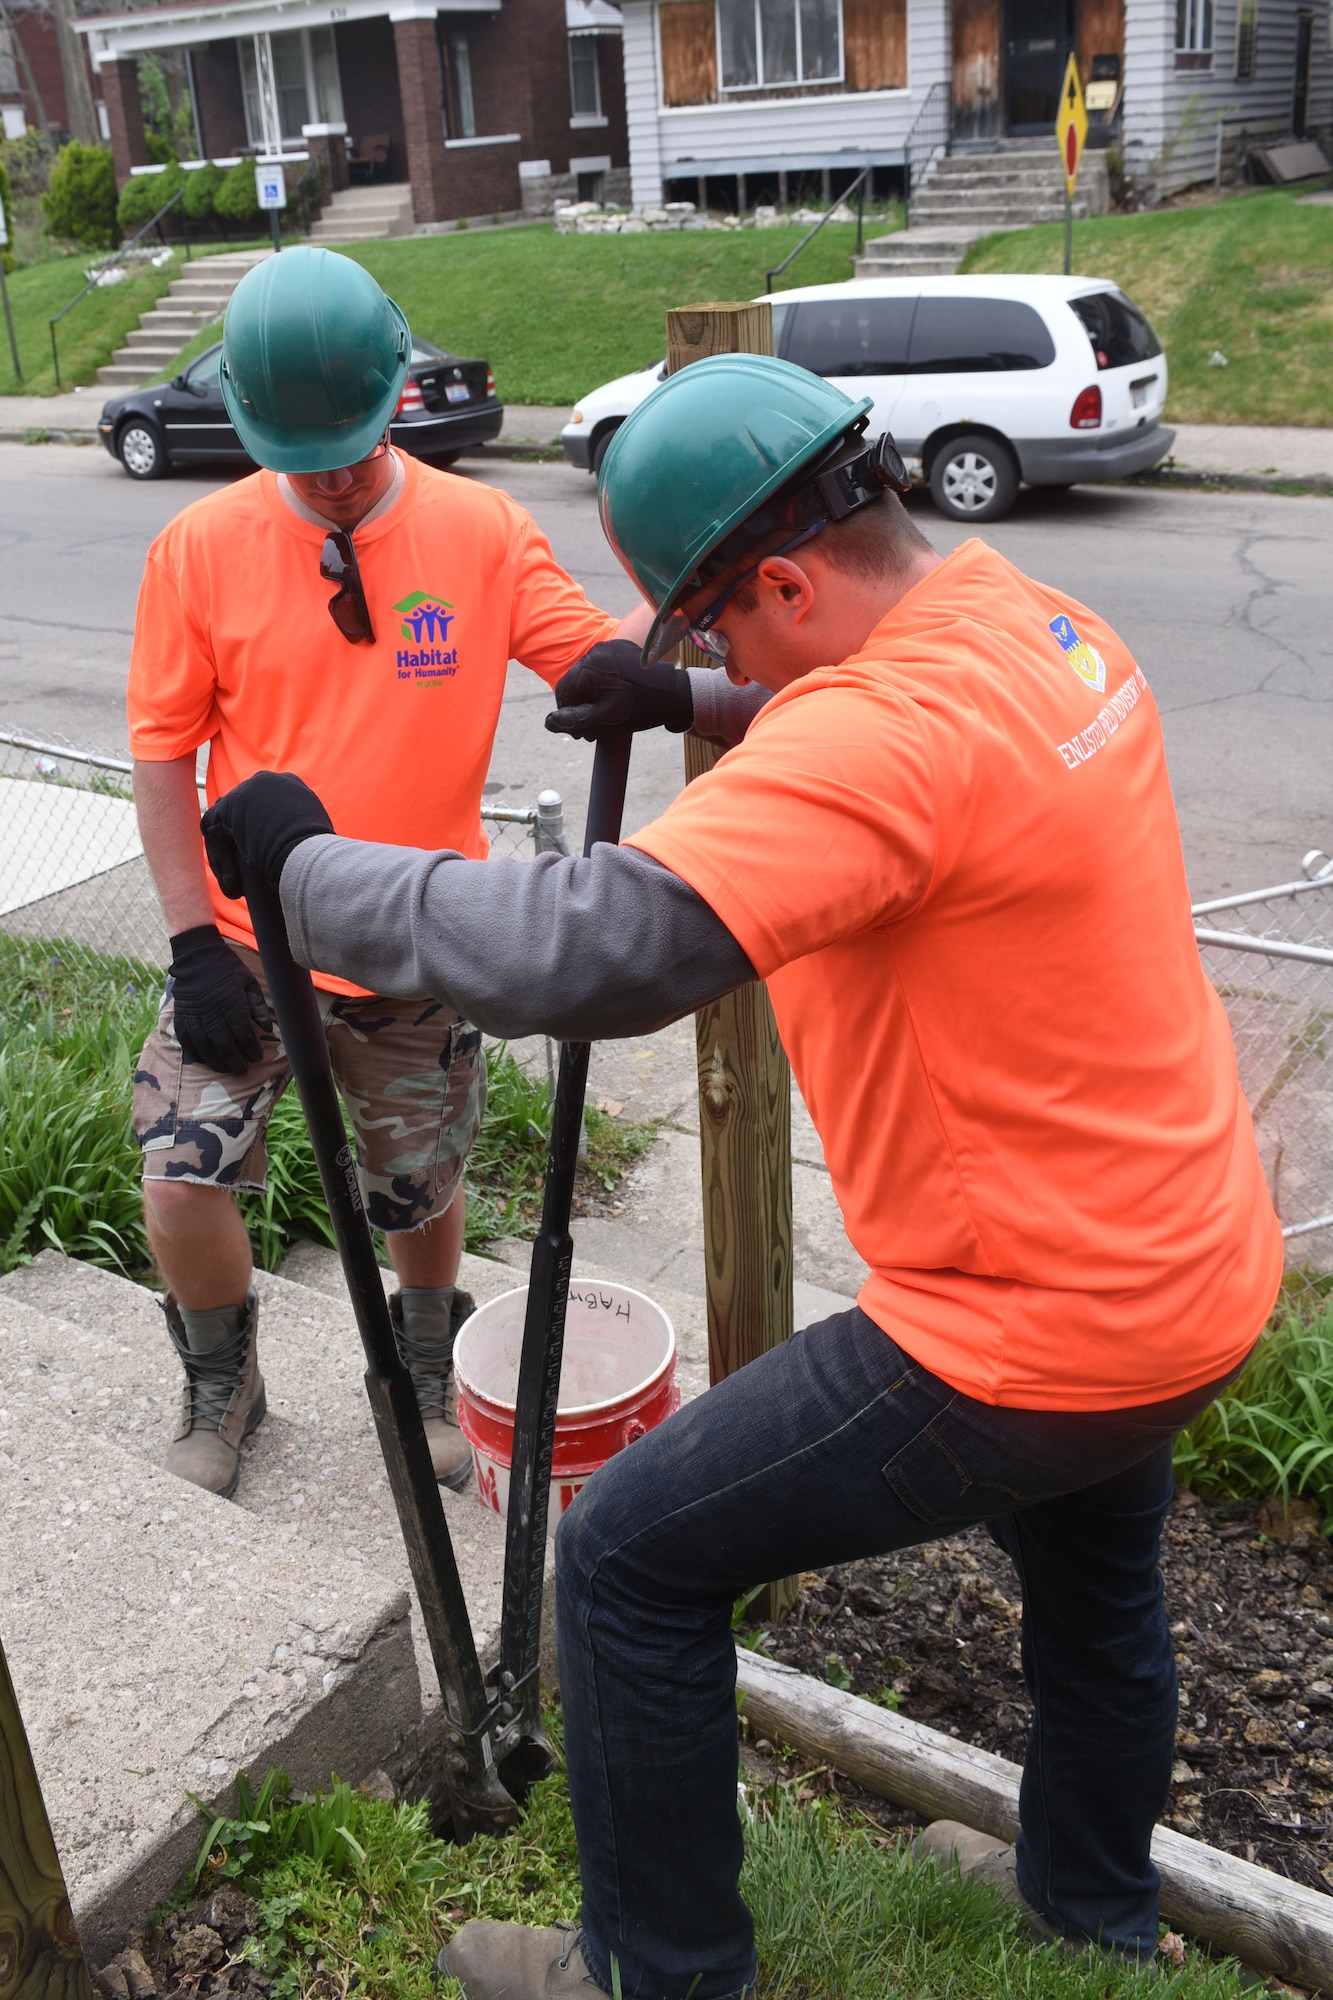 U.S. Air Force Senior Airman Brayden Pratt, with the 121st Logistics Readiness Squadron, digs a hole to put in a railing support post during a community outreach program with Habitat for Humanity April 23, 2016 Columbus, Ohio. EFAC Airmen helped to build a new walkway railing, repaint window sills and replace old windows for a local family in need. (U.S. Air National Guard photo by Airman 1st Class Ashley Williams/Released)